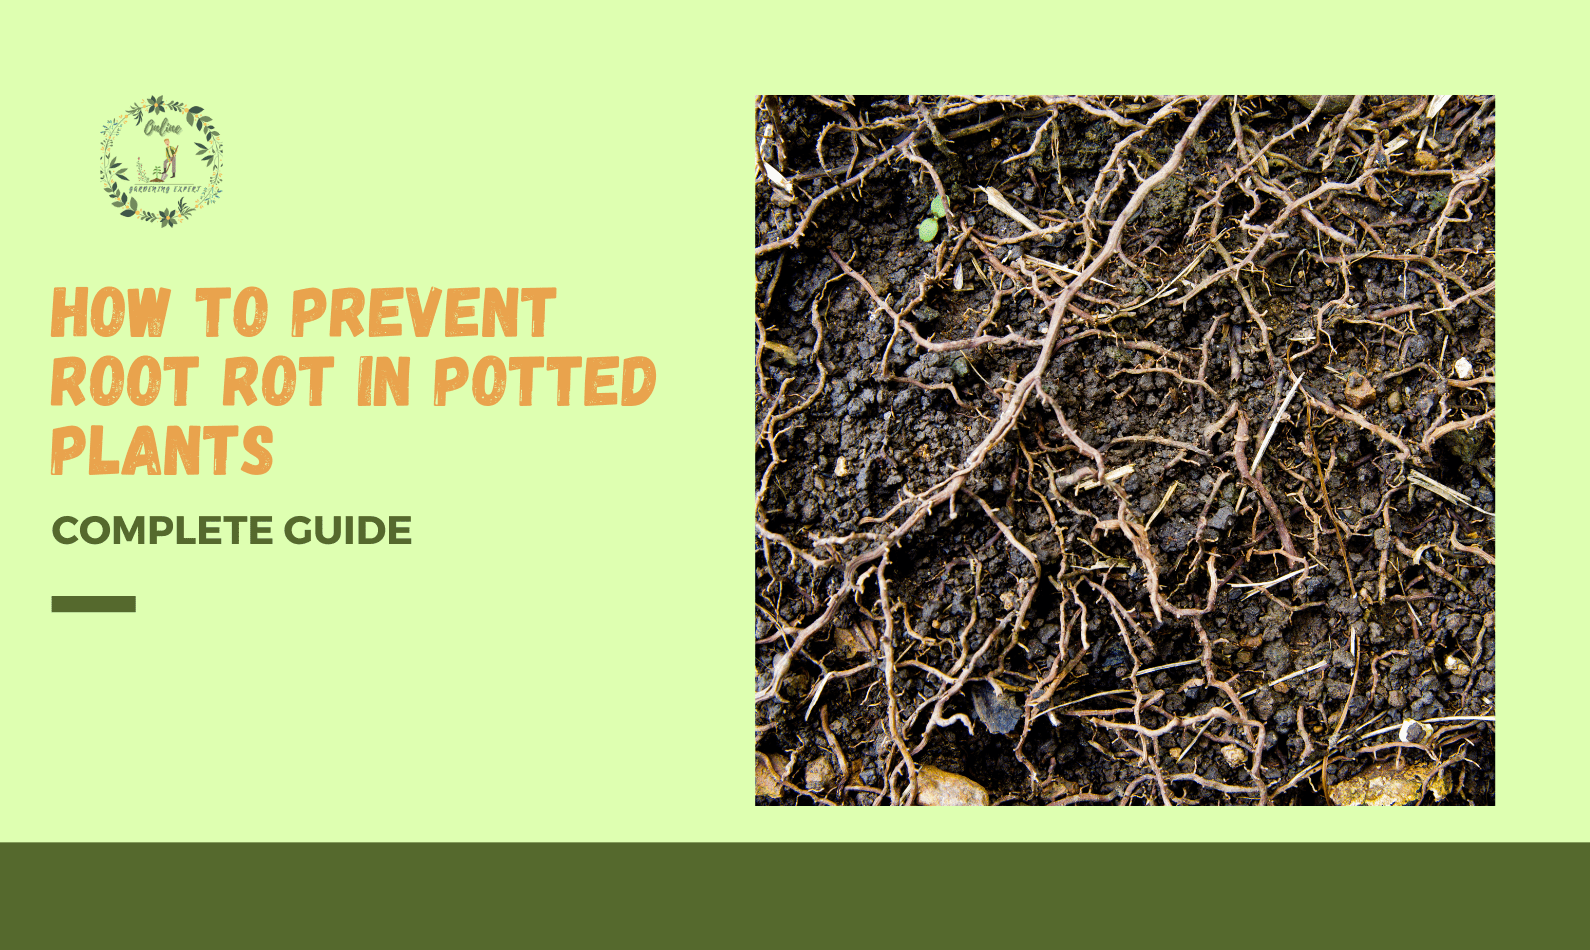 How to Prevent Root Rot in Potted Plants